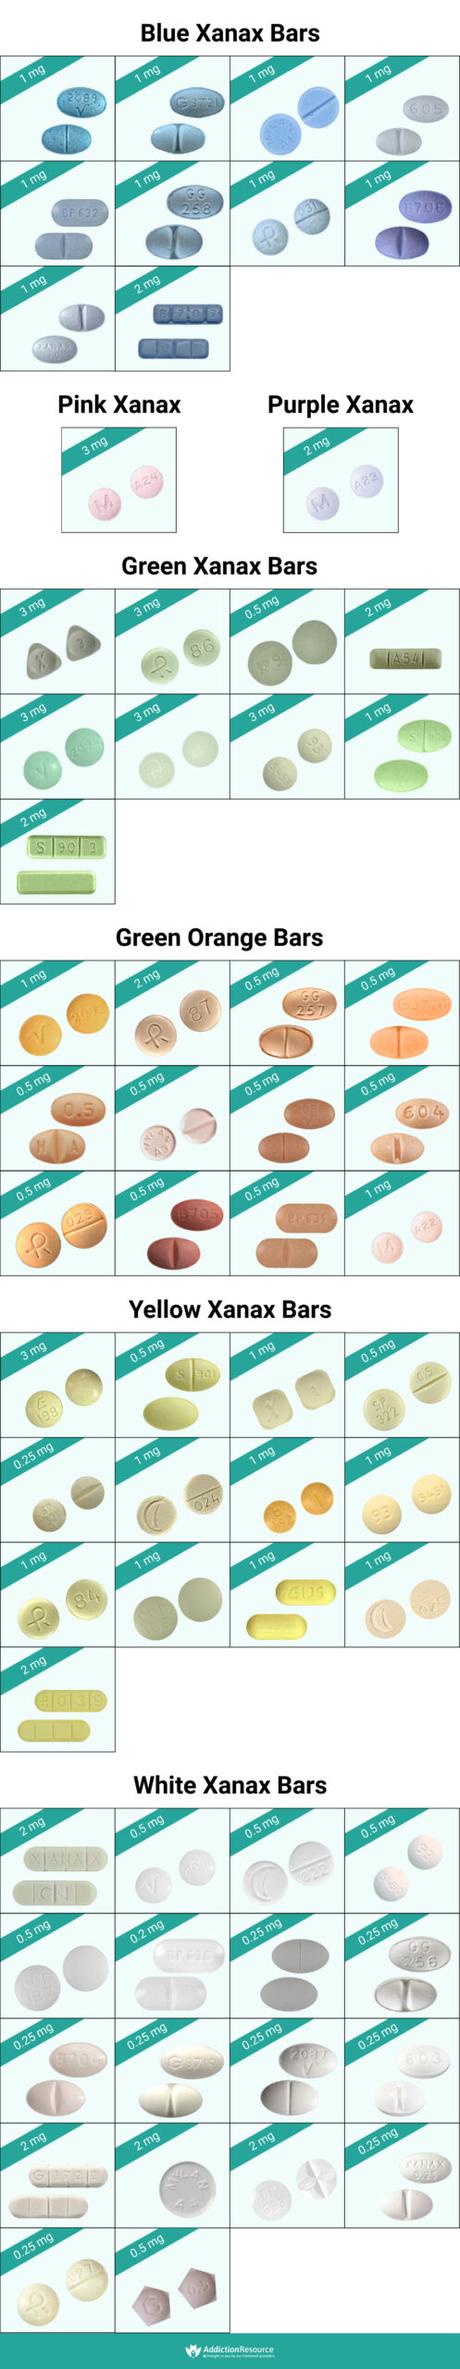 Infographic About Xanax Bars